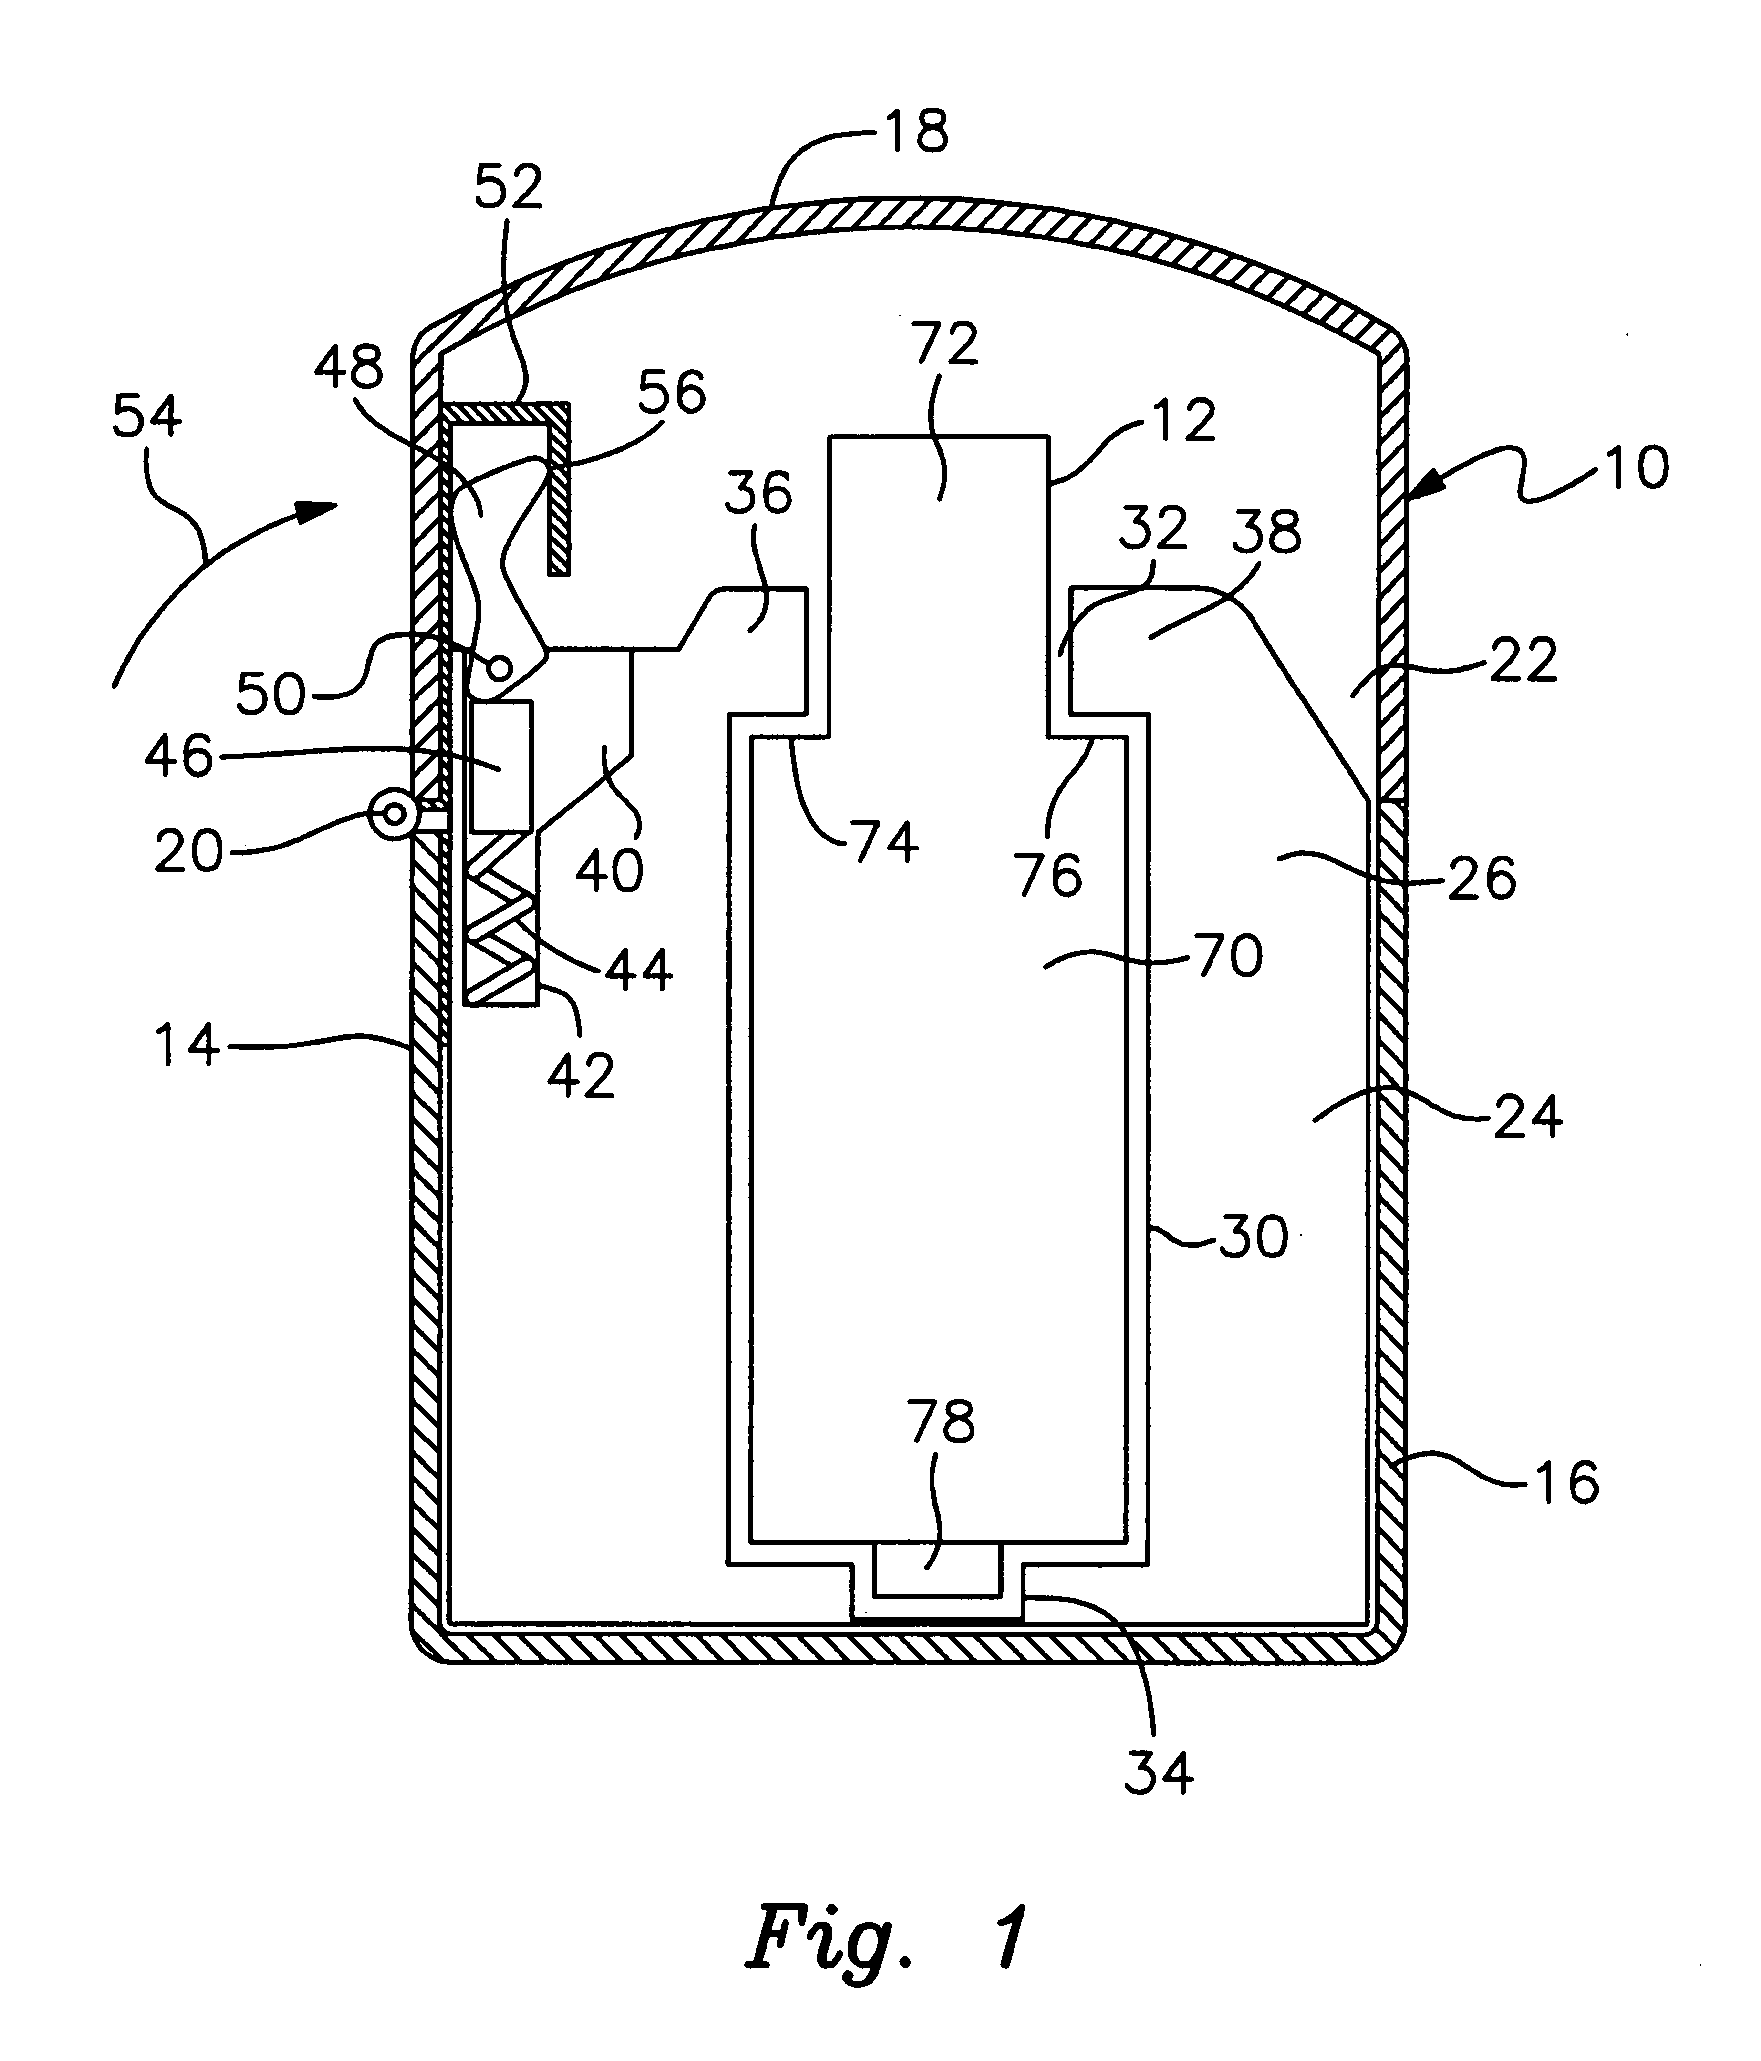 Protective enclosure for an electronic data storage device